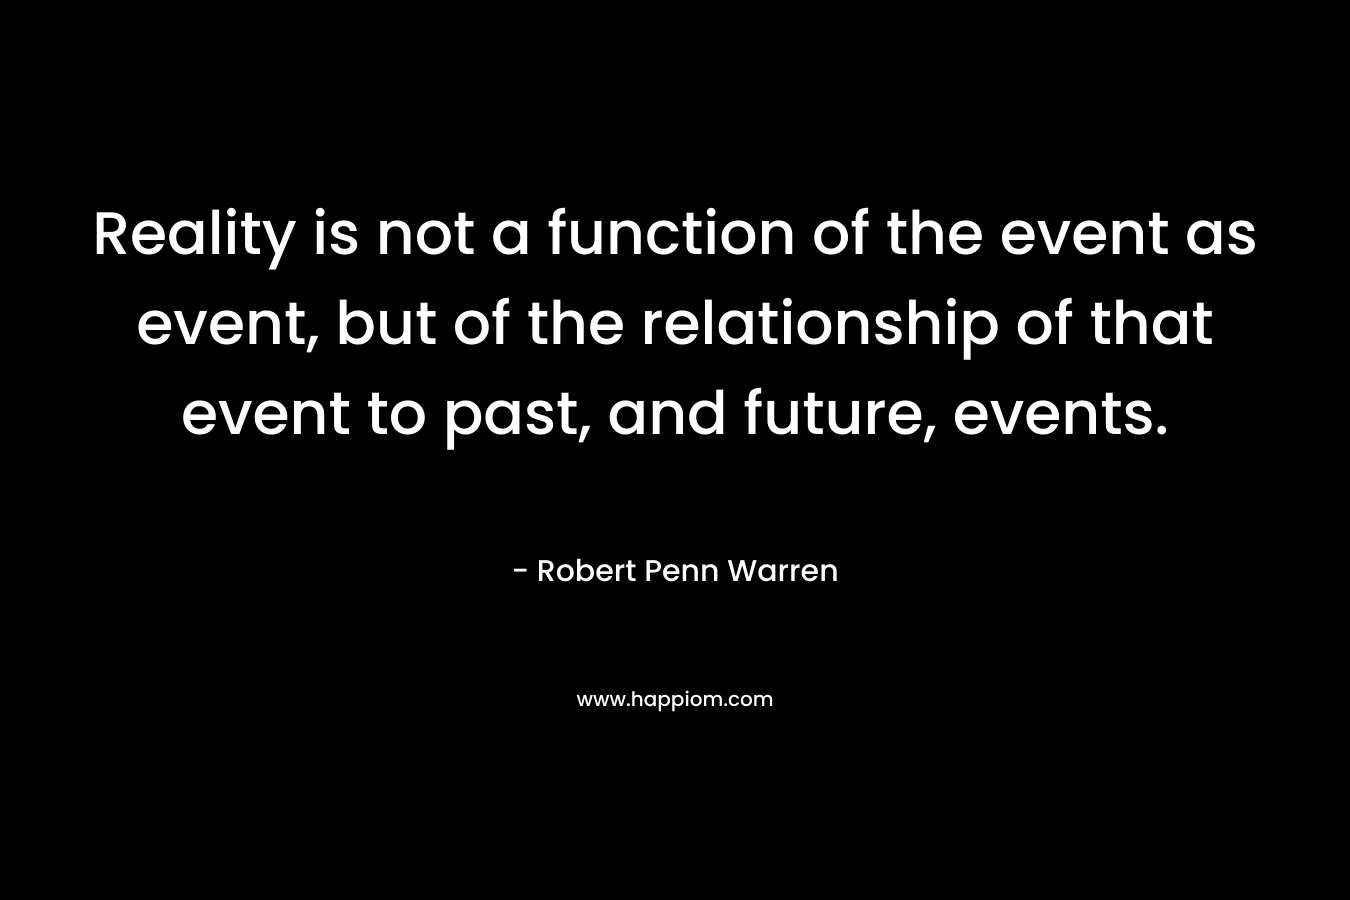 Reality is not a function of the event as event, but of the relationship of that event to past, and future, events.